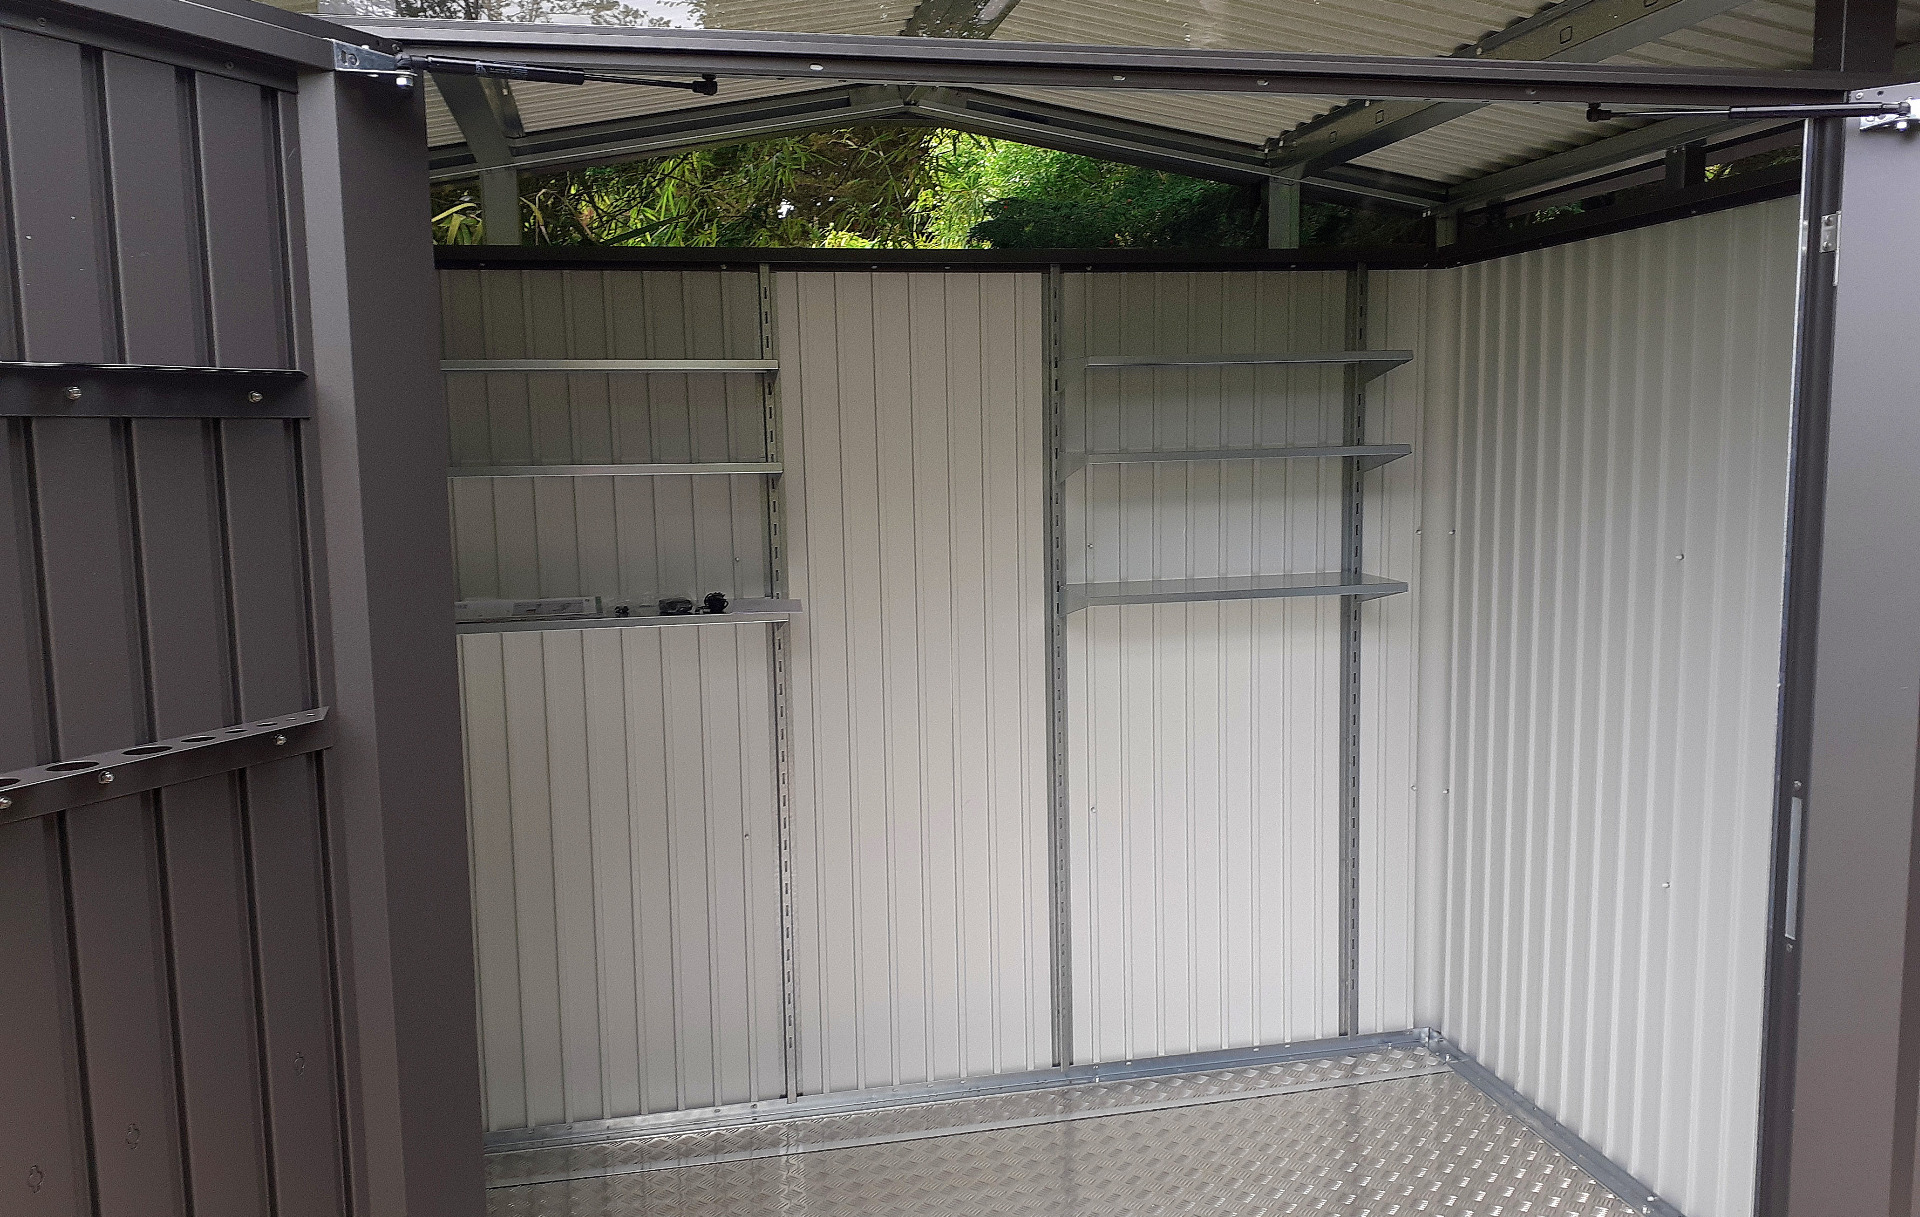 Biohort Panorama Garden Shed, Size P2 in metallic dark grey - supplied + fitted in Clontarf by Owen Chubb Landscapers